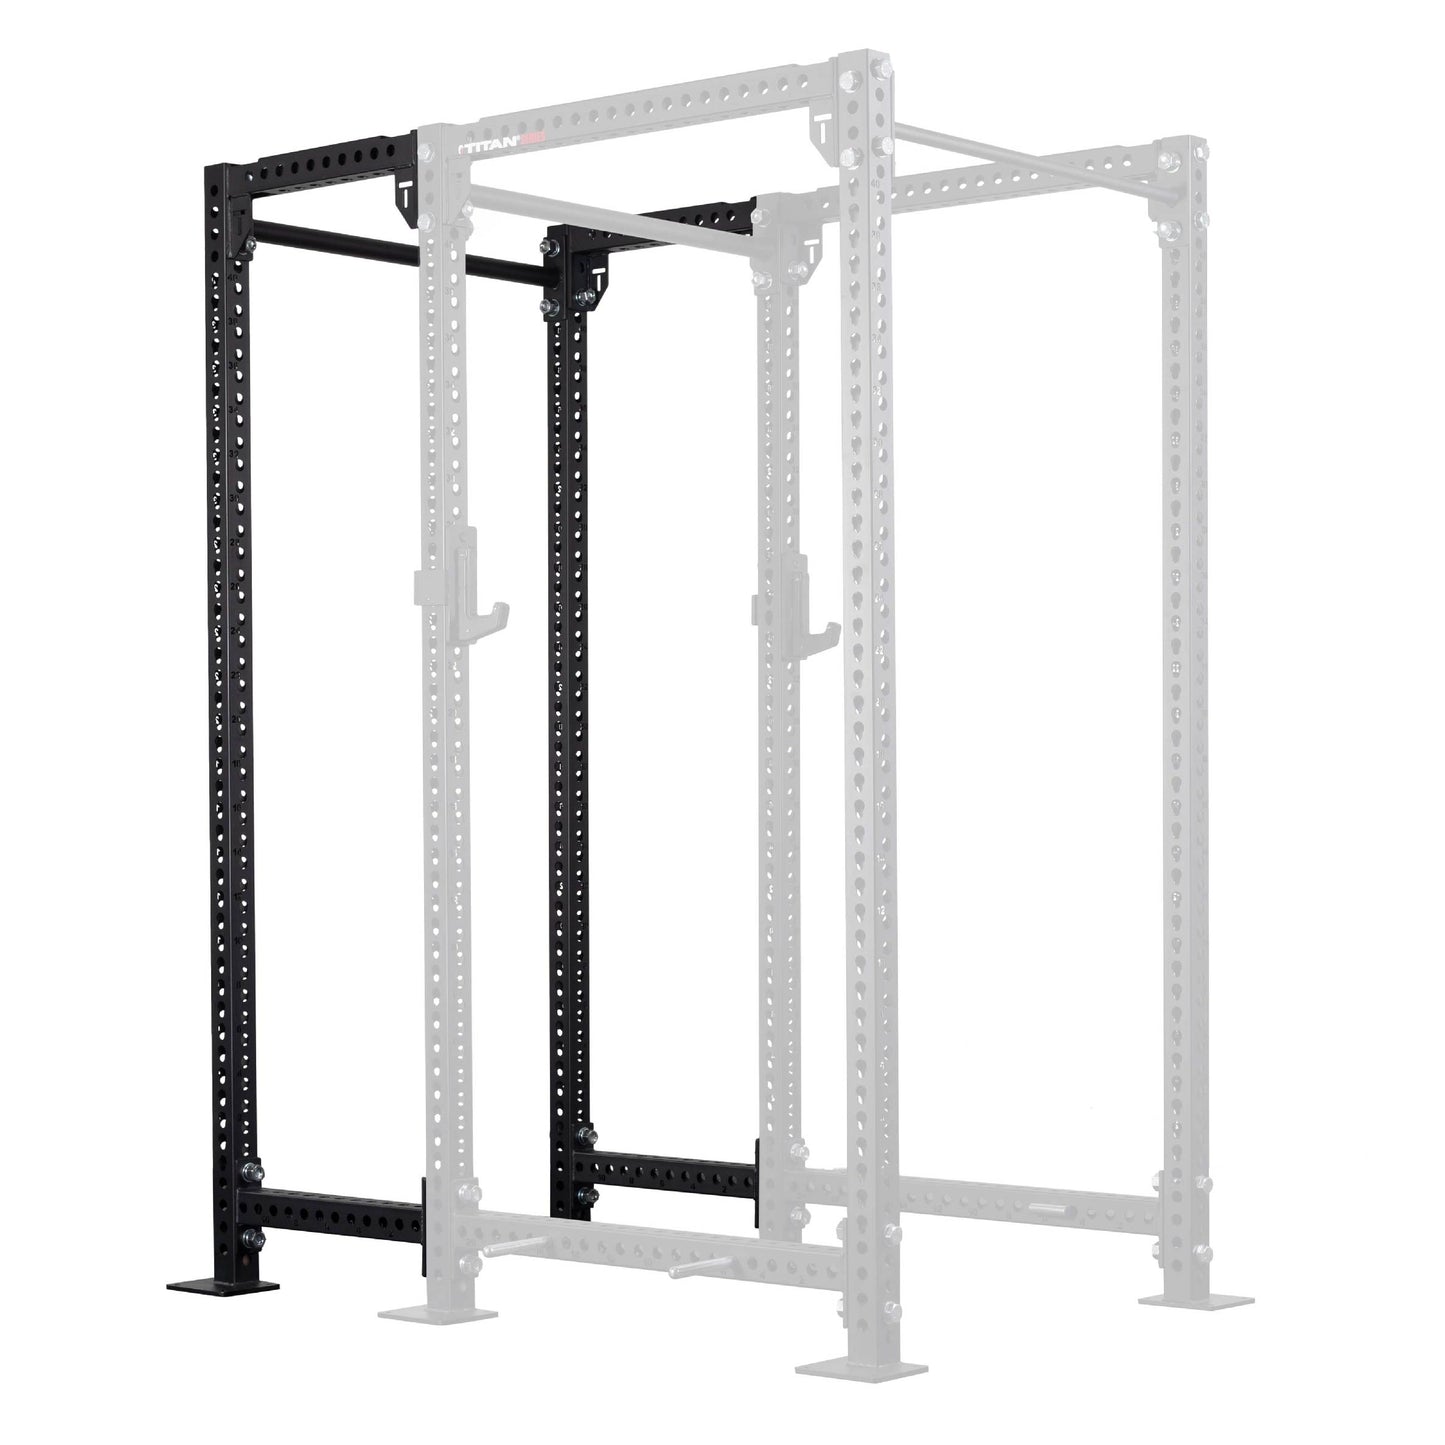 TITAN Series 24" Extension Kit - Extension Color: Black - Extension Height: 100" - Crossmember: 2" Fat Pull-Up Bar | Black / 100" / 2" Fat Pull-Up Bar - view 29